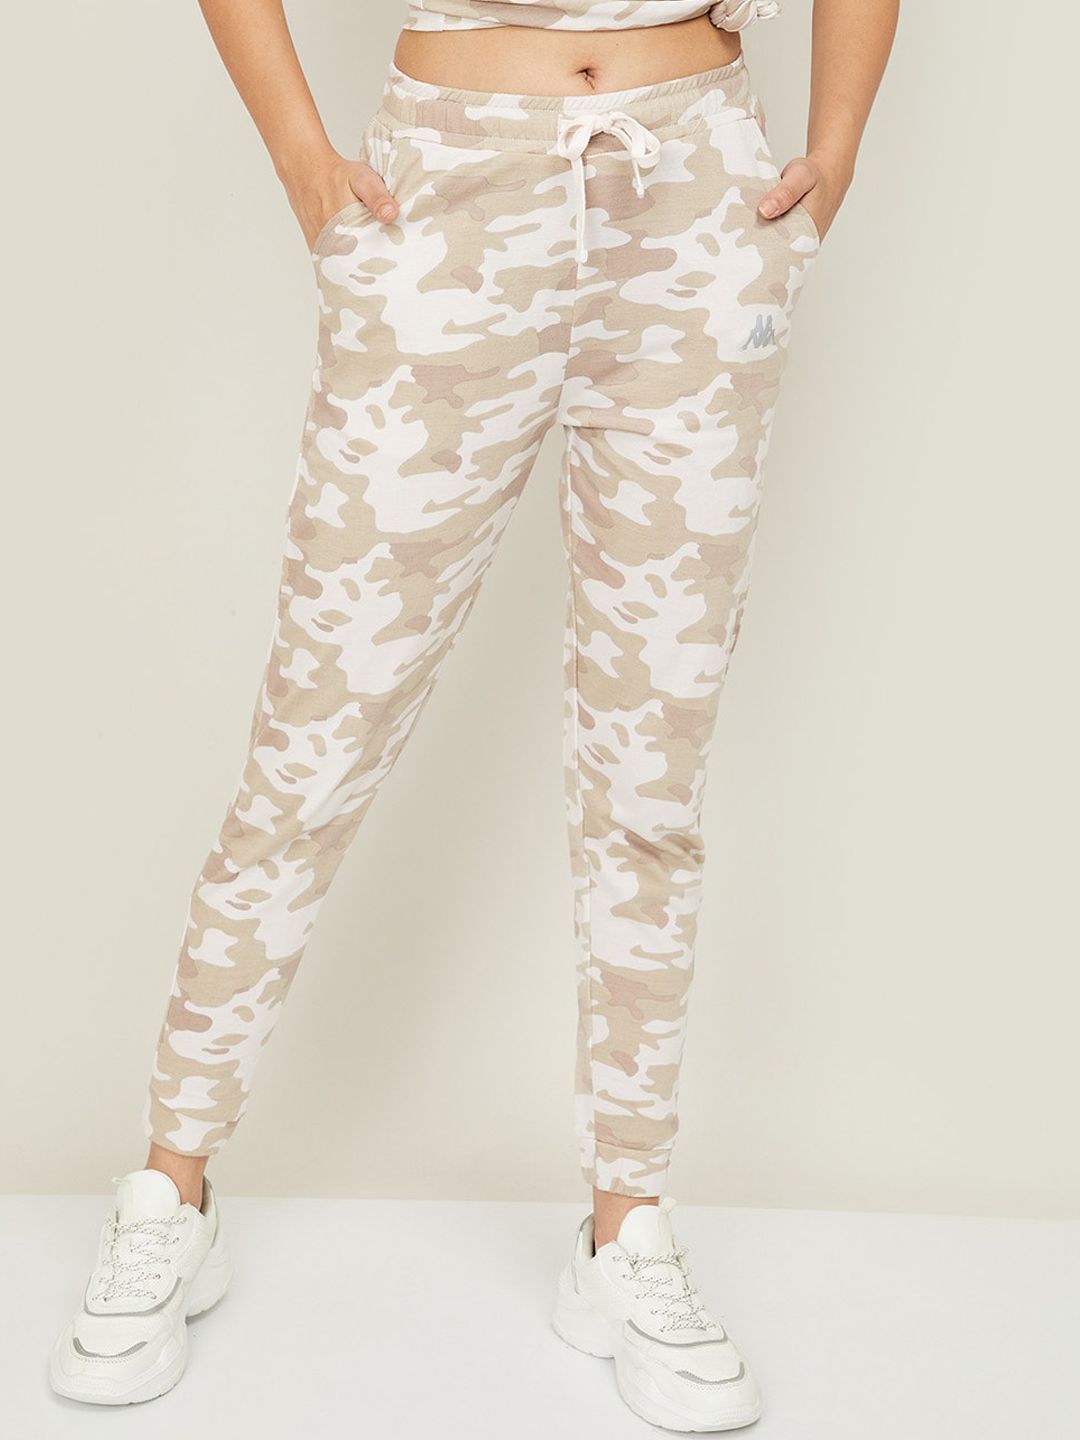 Kappa Beige & White Printed Regular Fit Cotton Joggers Price in India